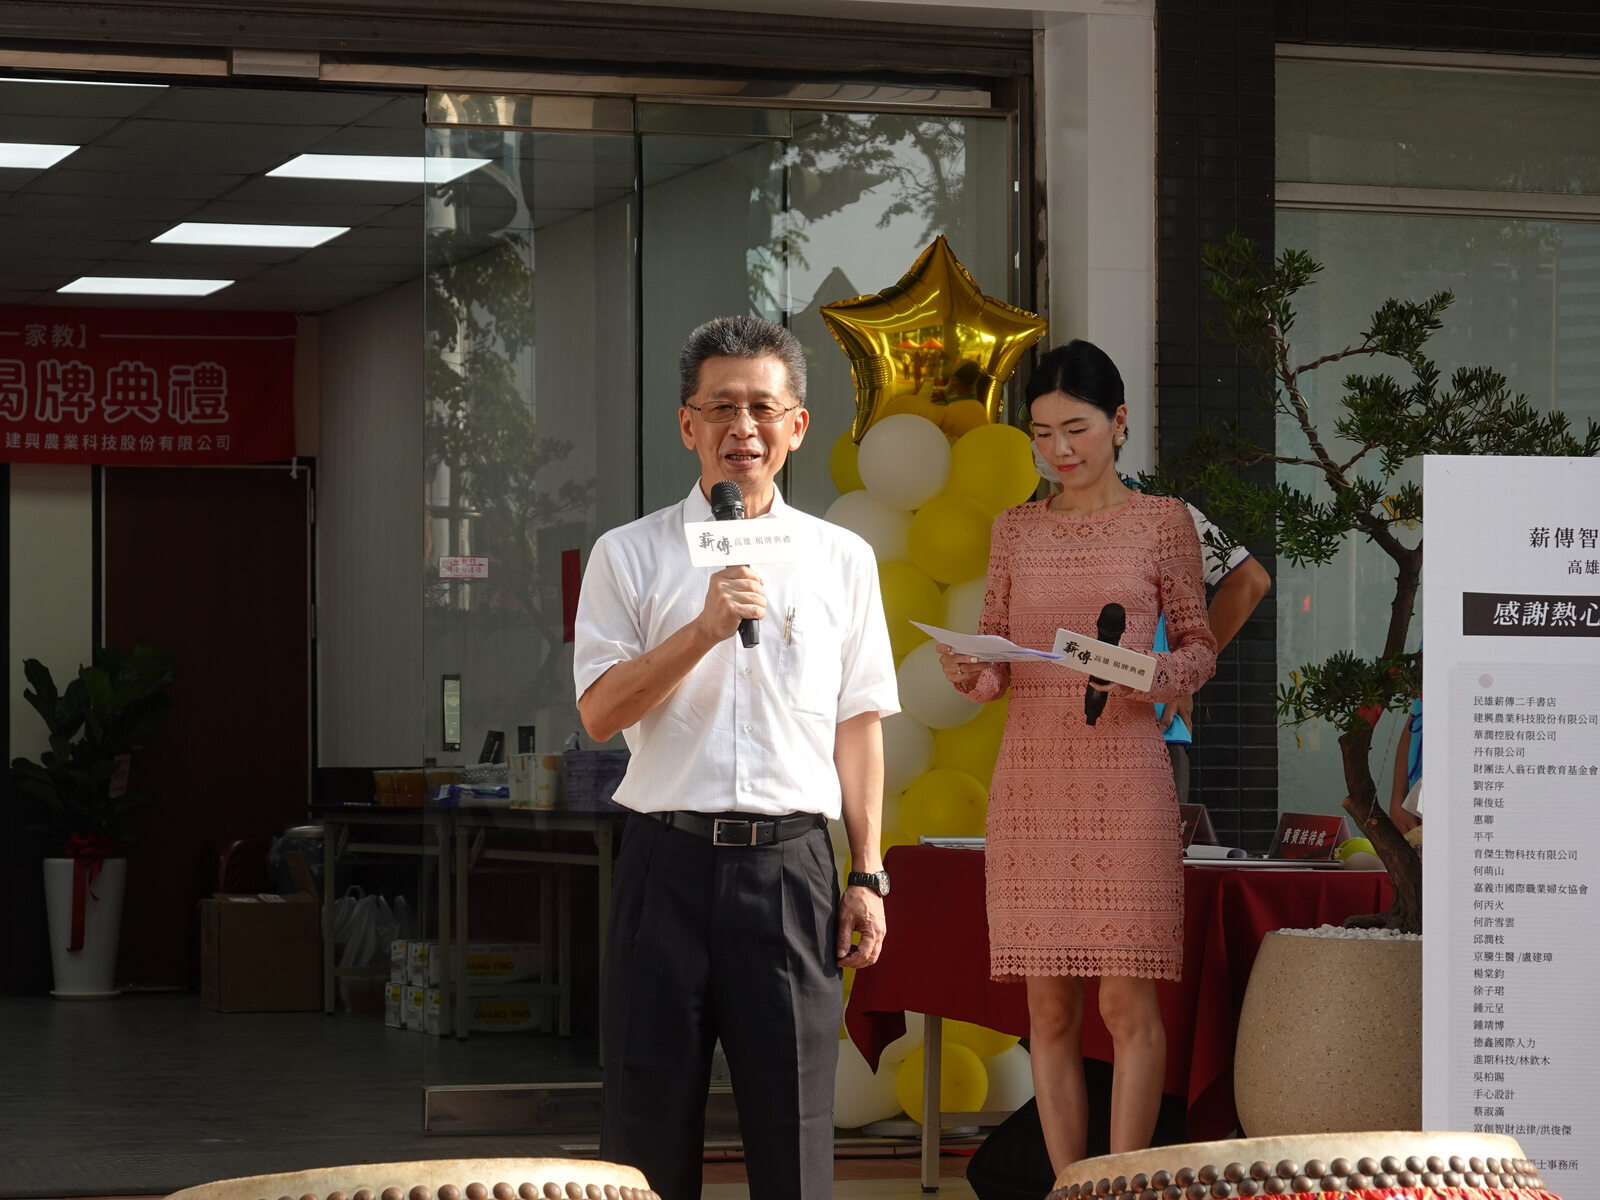 Prof. Jui-Kun Kuo （郭瑞坤）, the Associate Dean of NSYSU College of Management, presented the opening remark for the ceremony